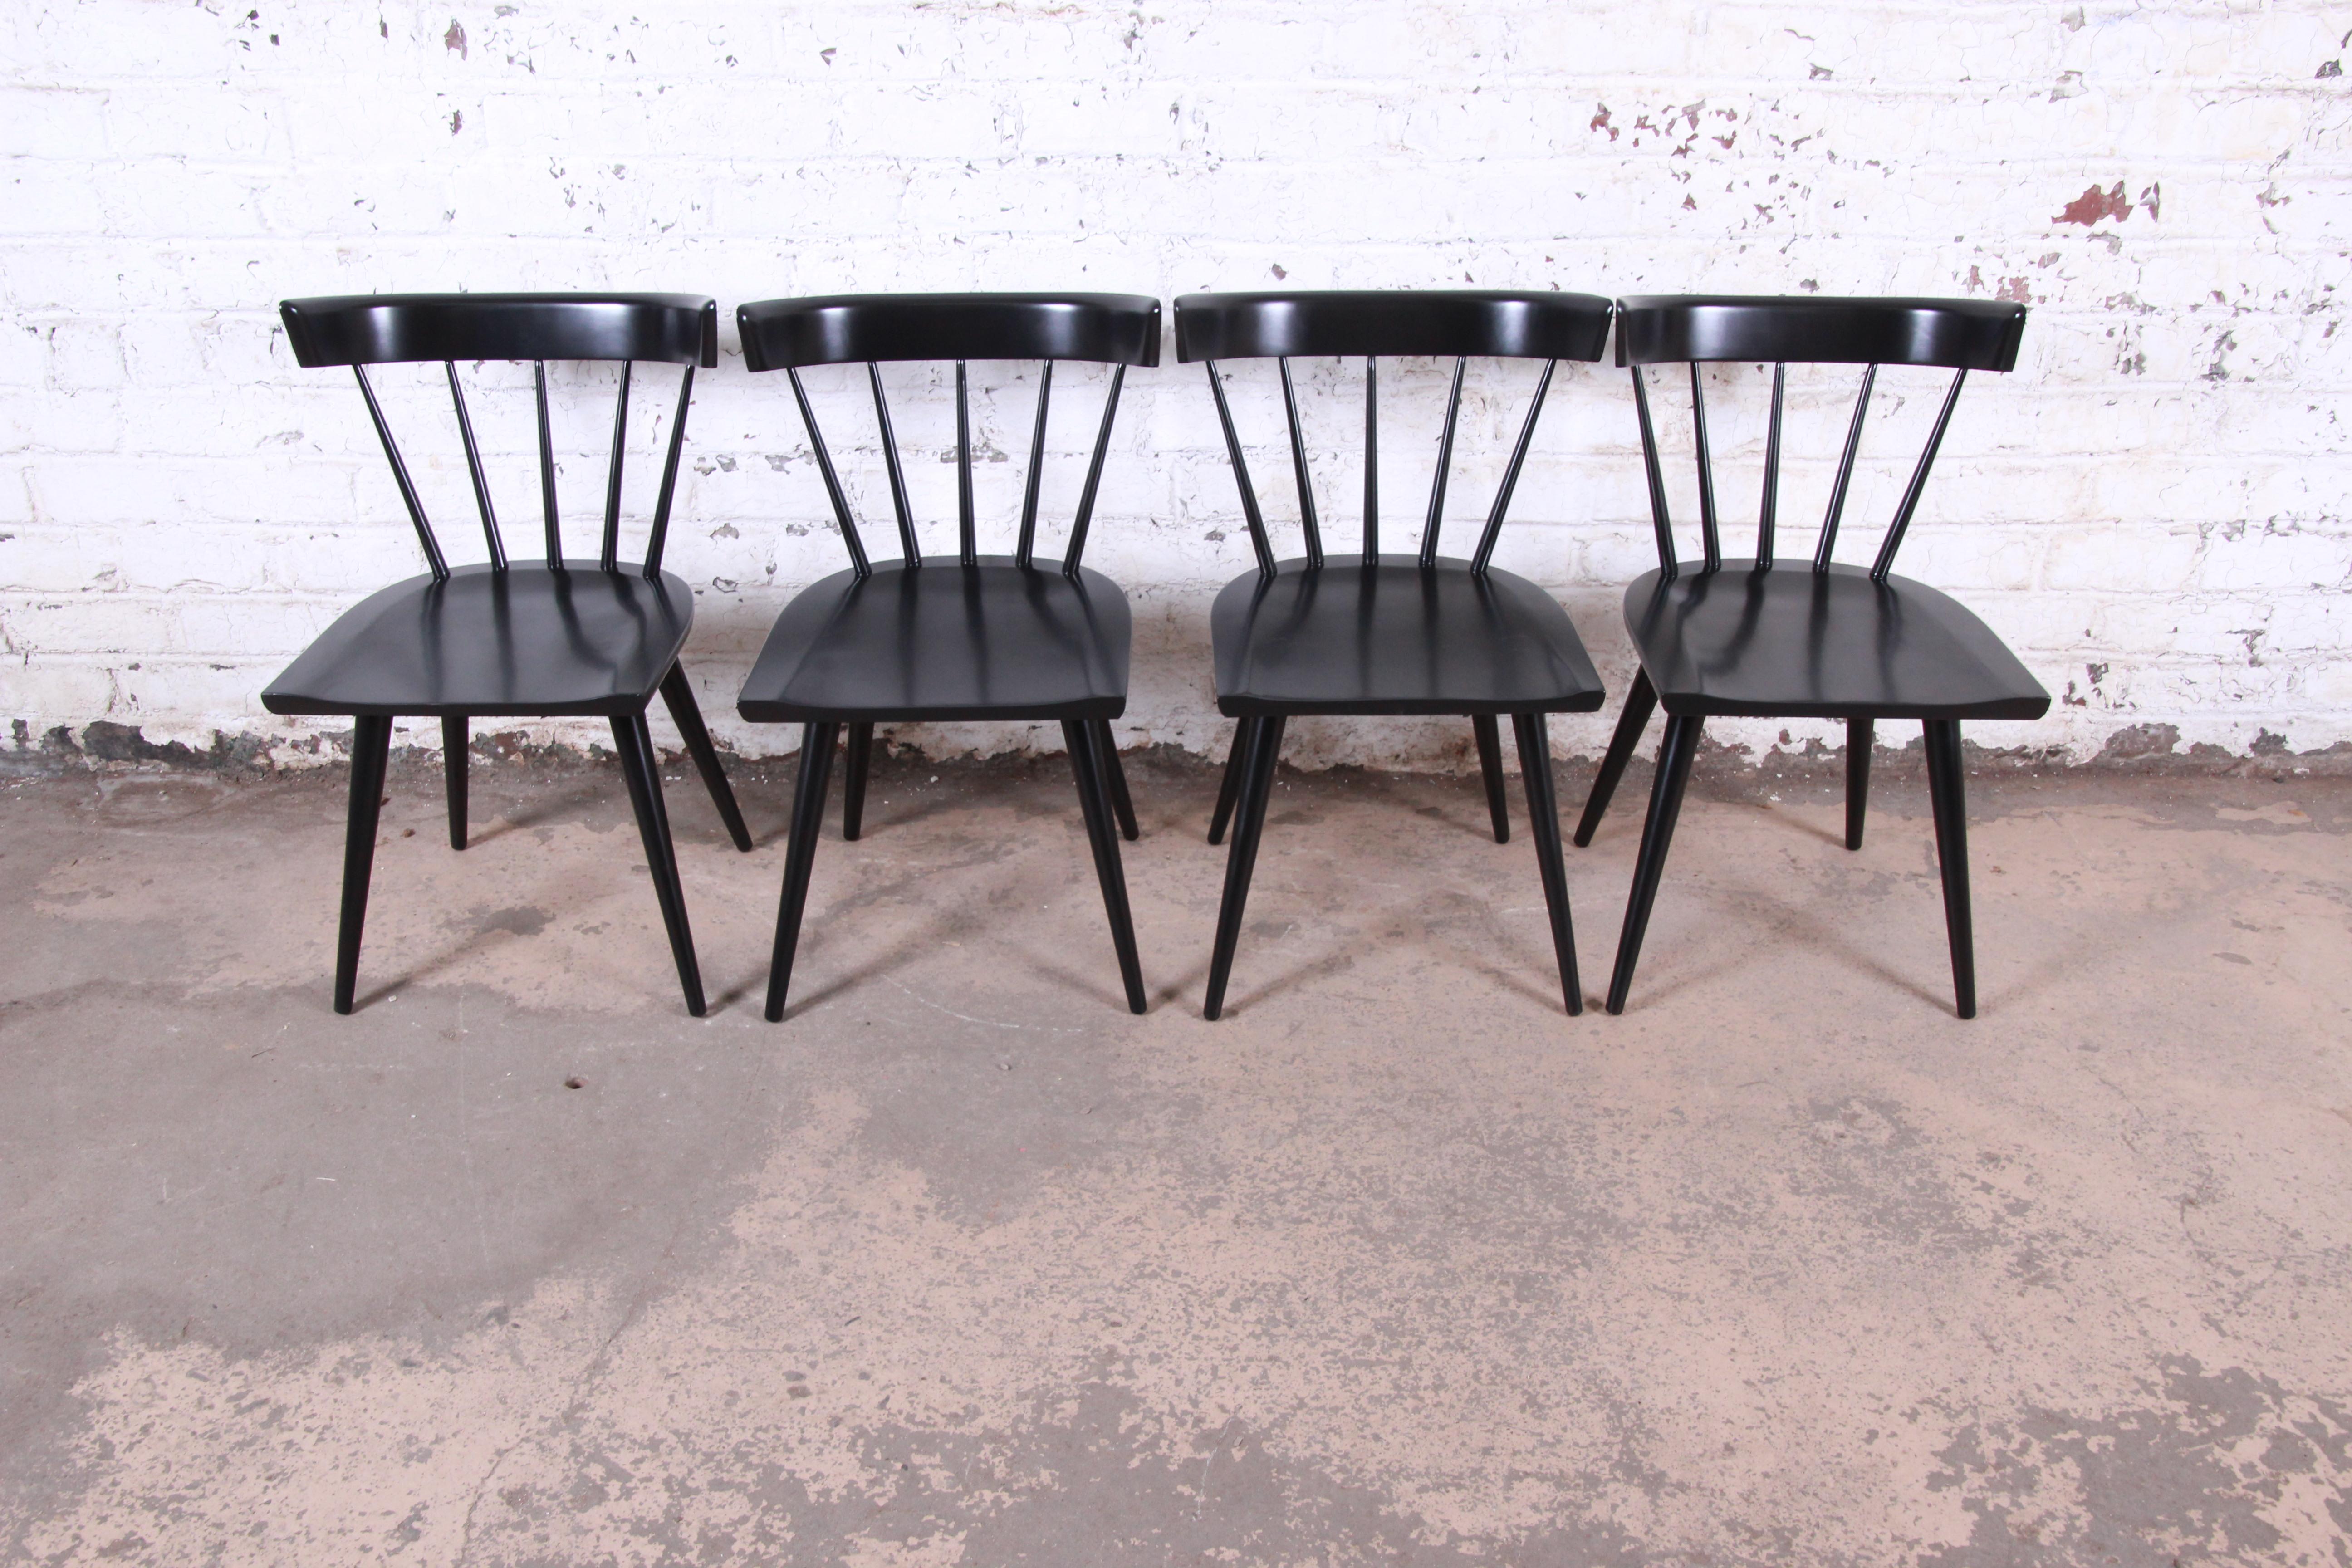 A gorgeous set of iconic Mid-Century Modern spindle back dining chairs

Designed by Paul McCobb for Winchendon Furniture 